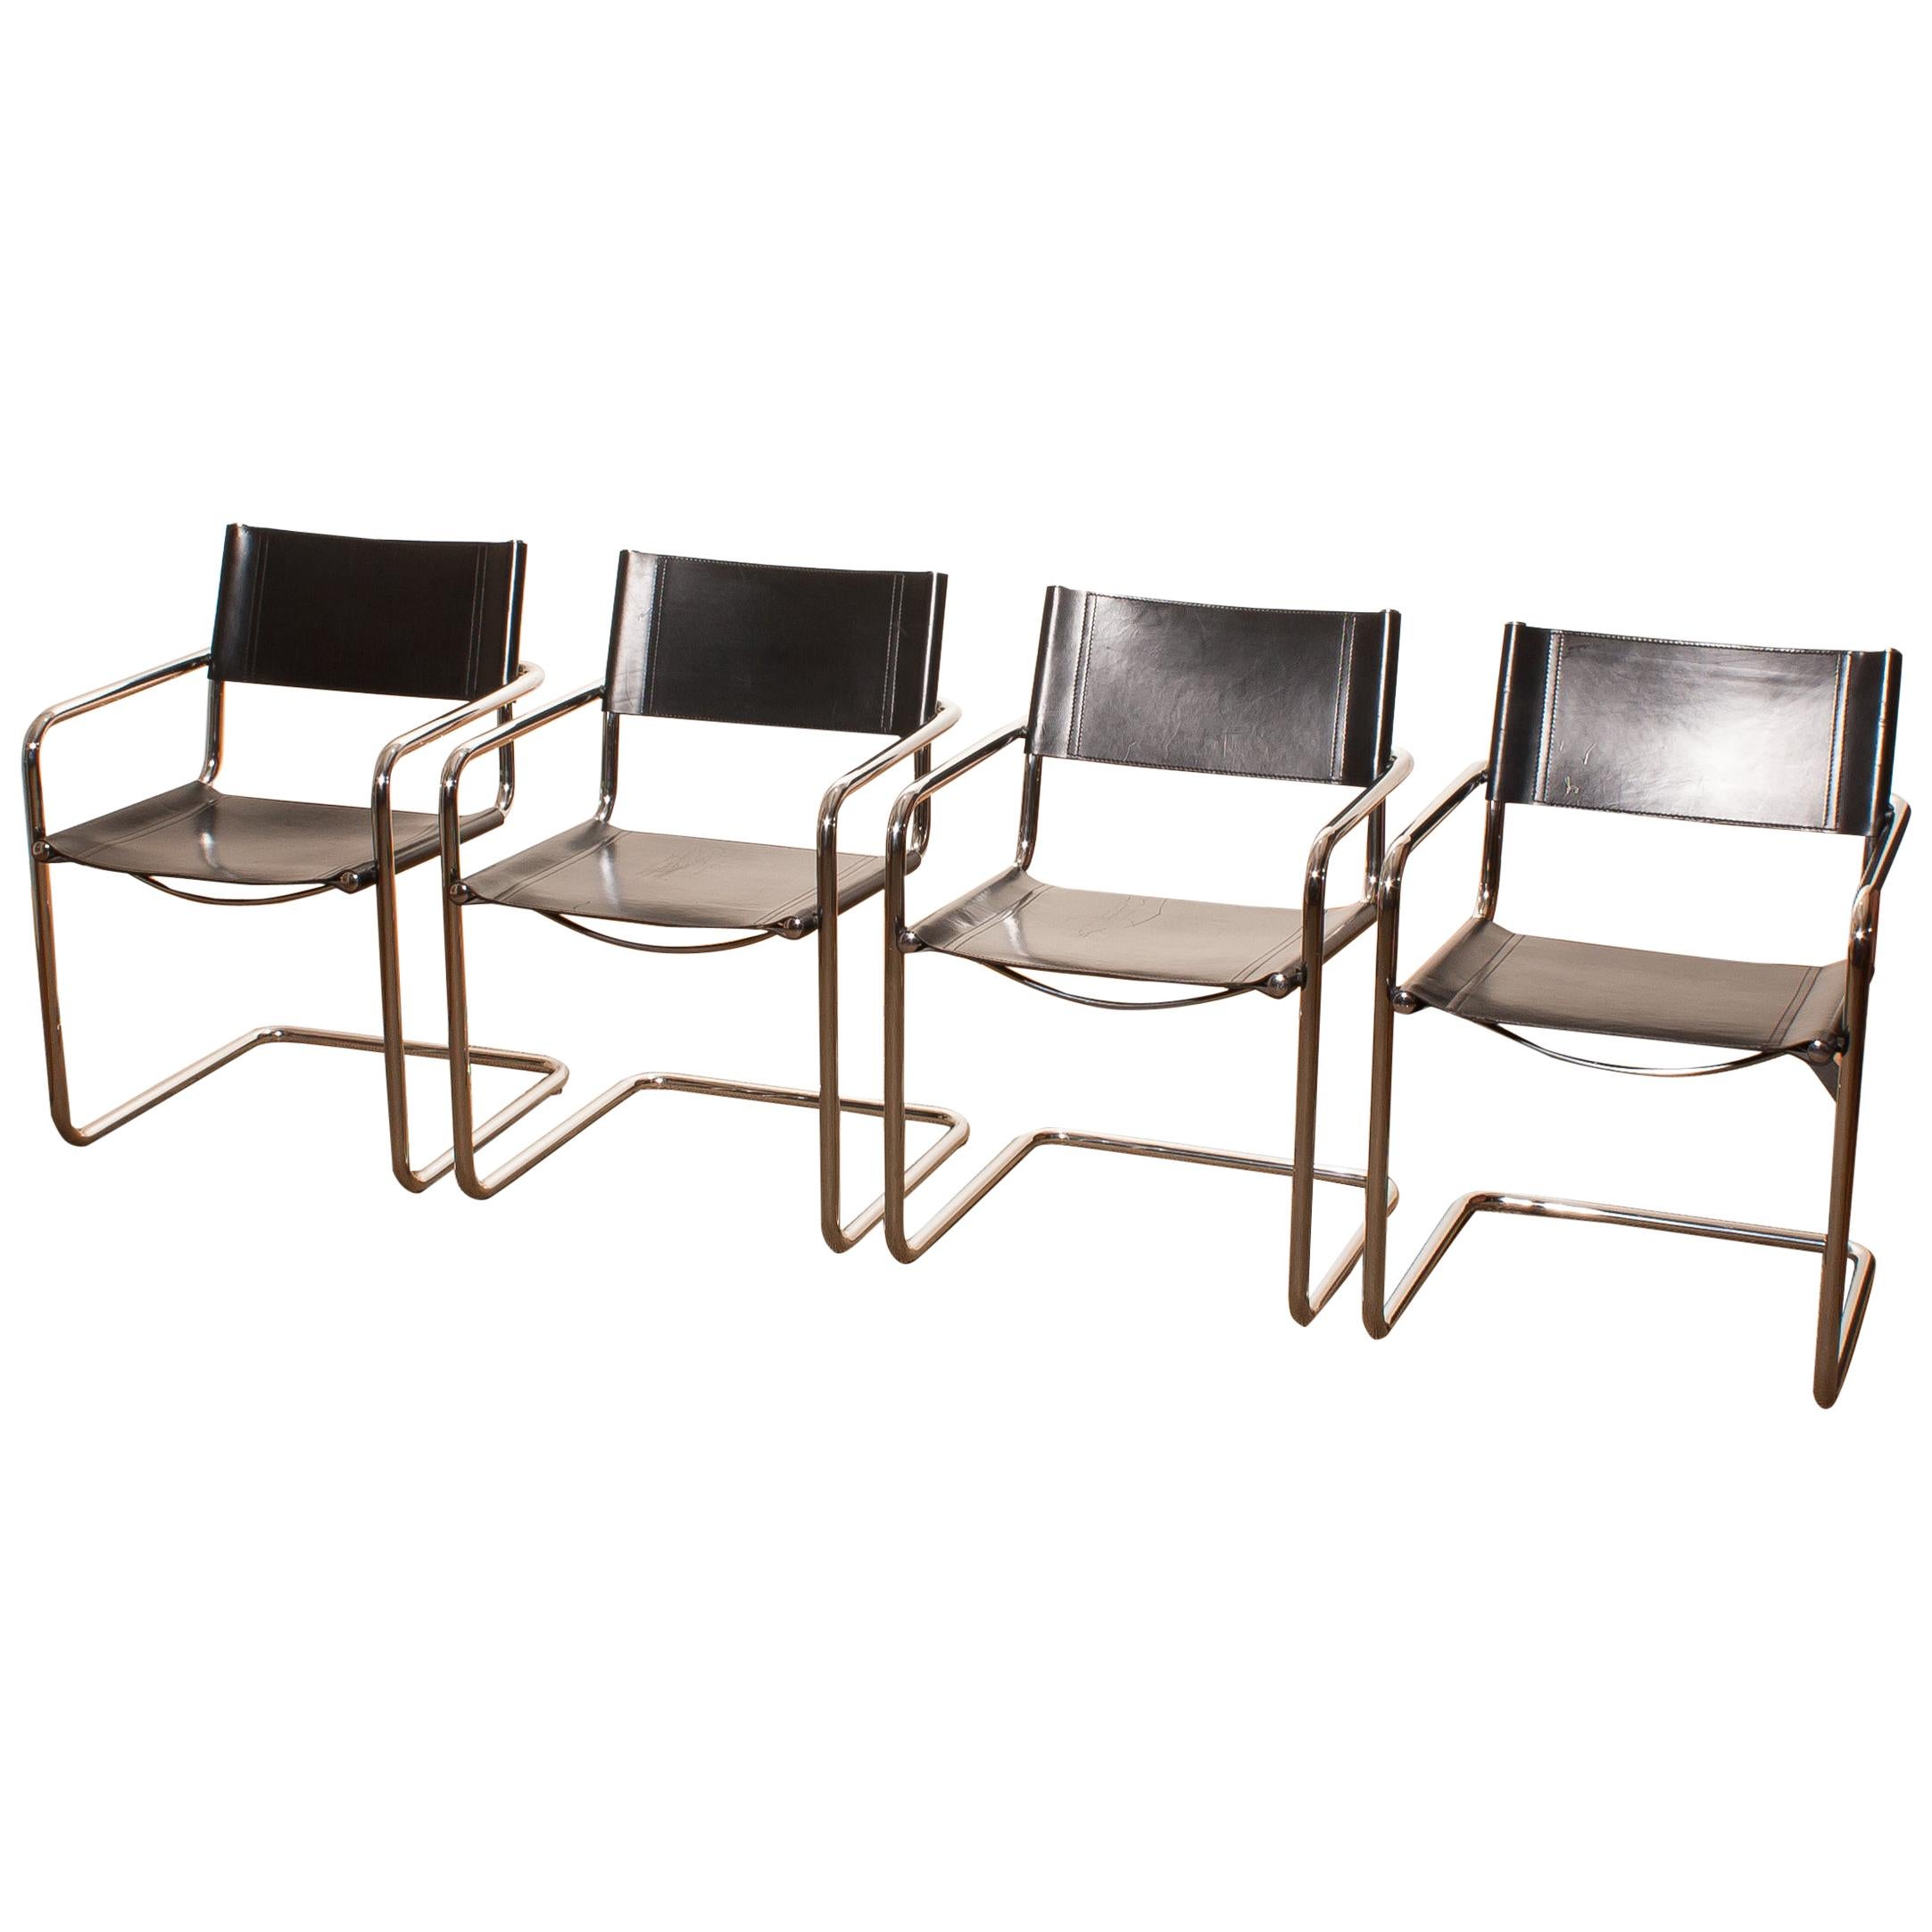 1970s, Set of Four MG5 Black Leather Dining / Office Chairs by Matteo Grassi